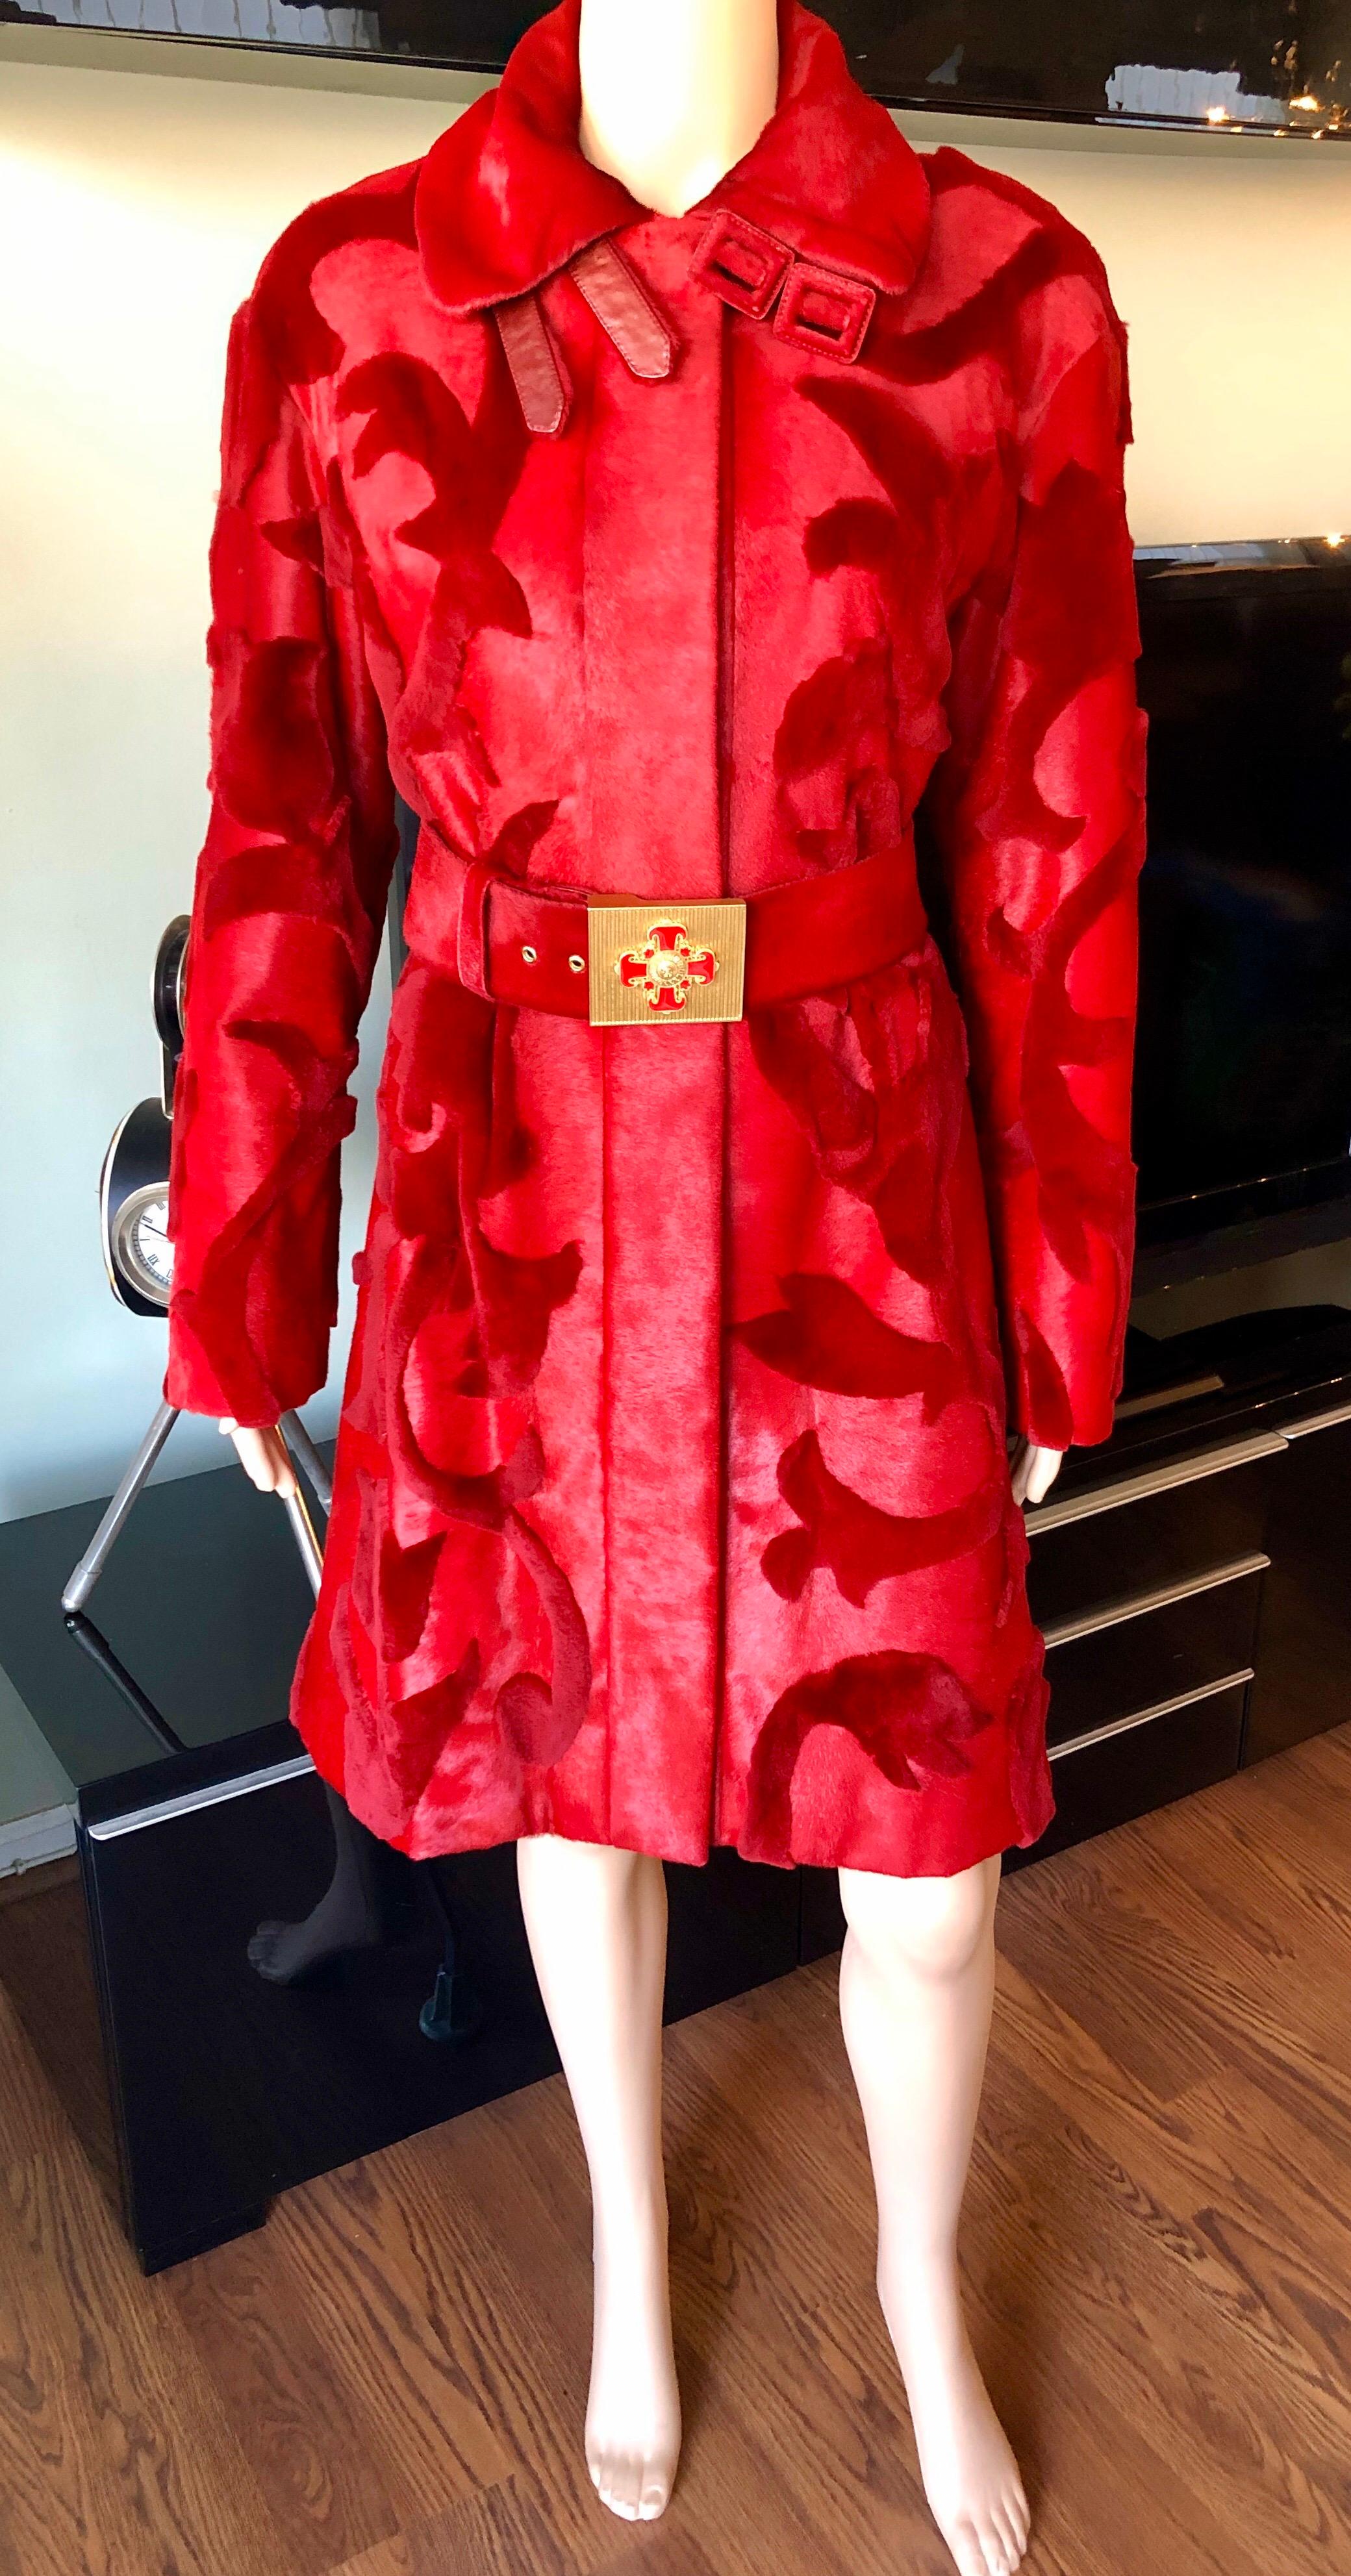 Women's Versace F/W 2011 Runway Mink Fur and Leather Belted Knee-Length Red Jacket Coat For Sale